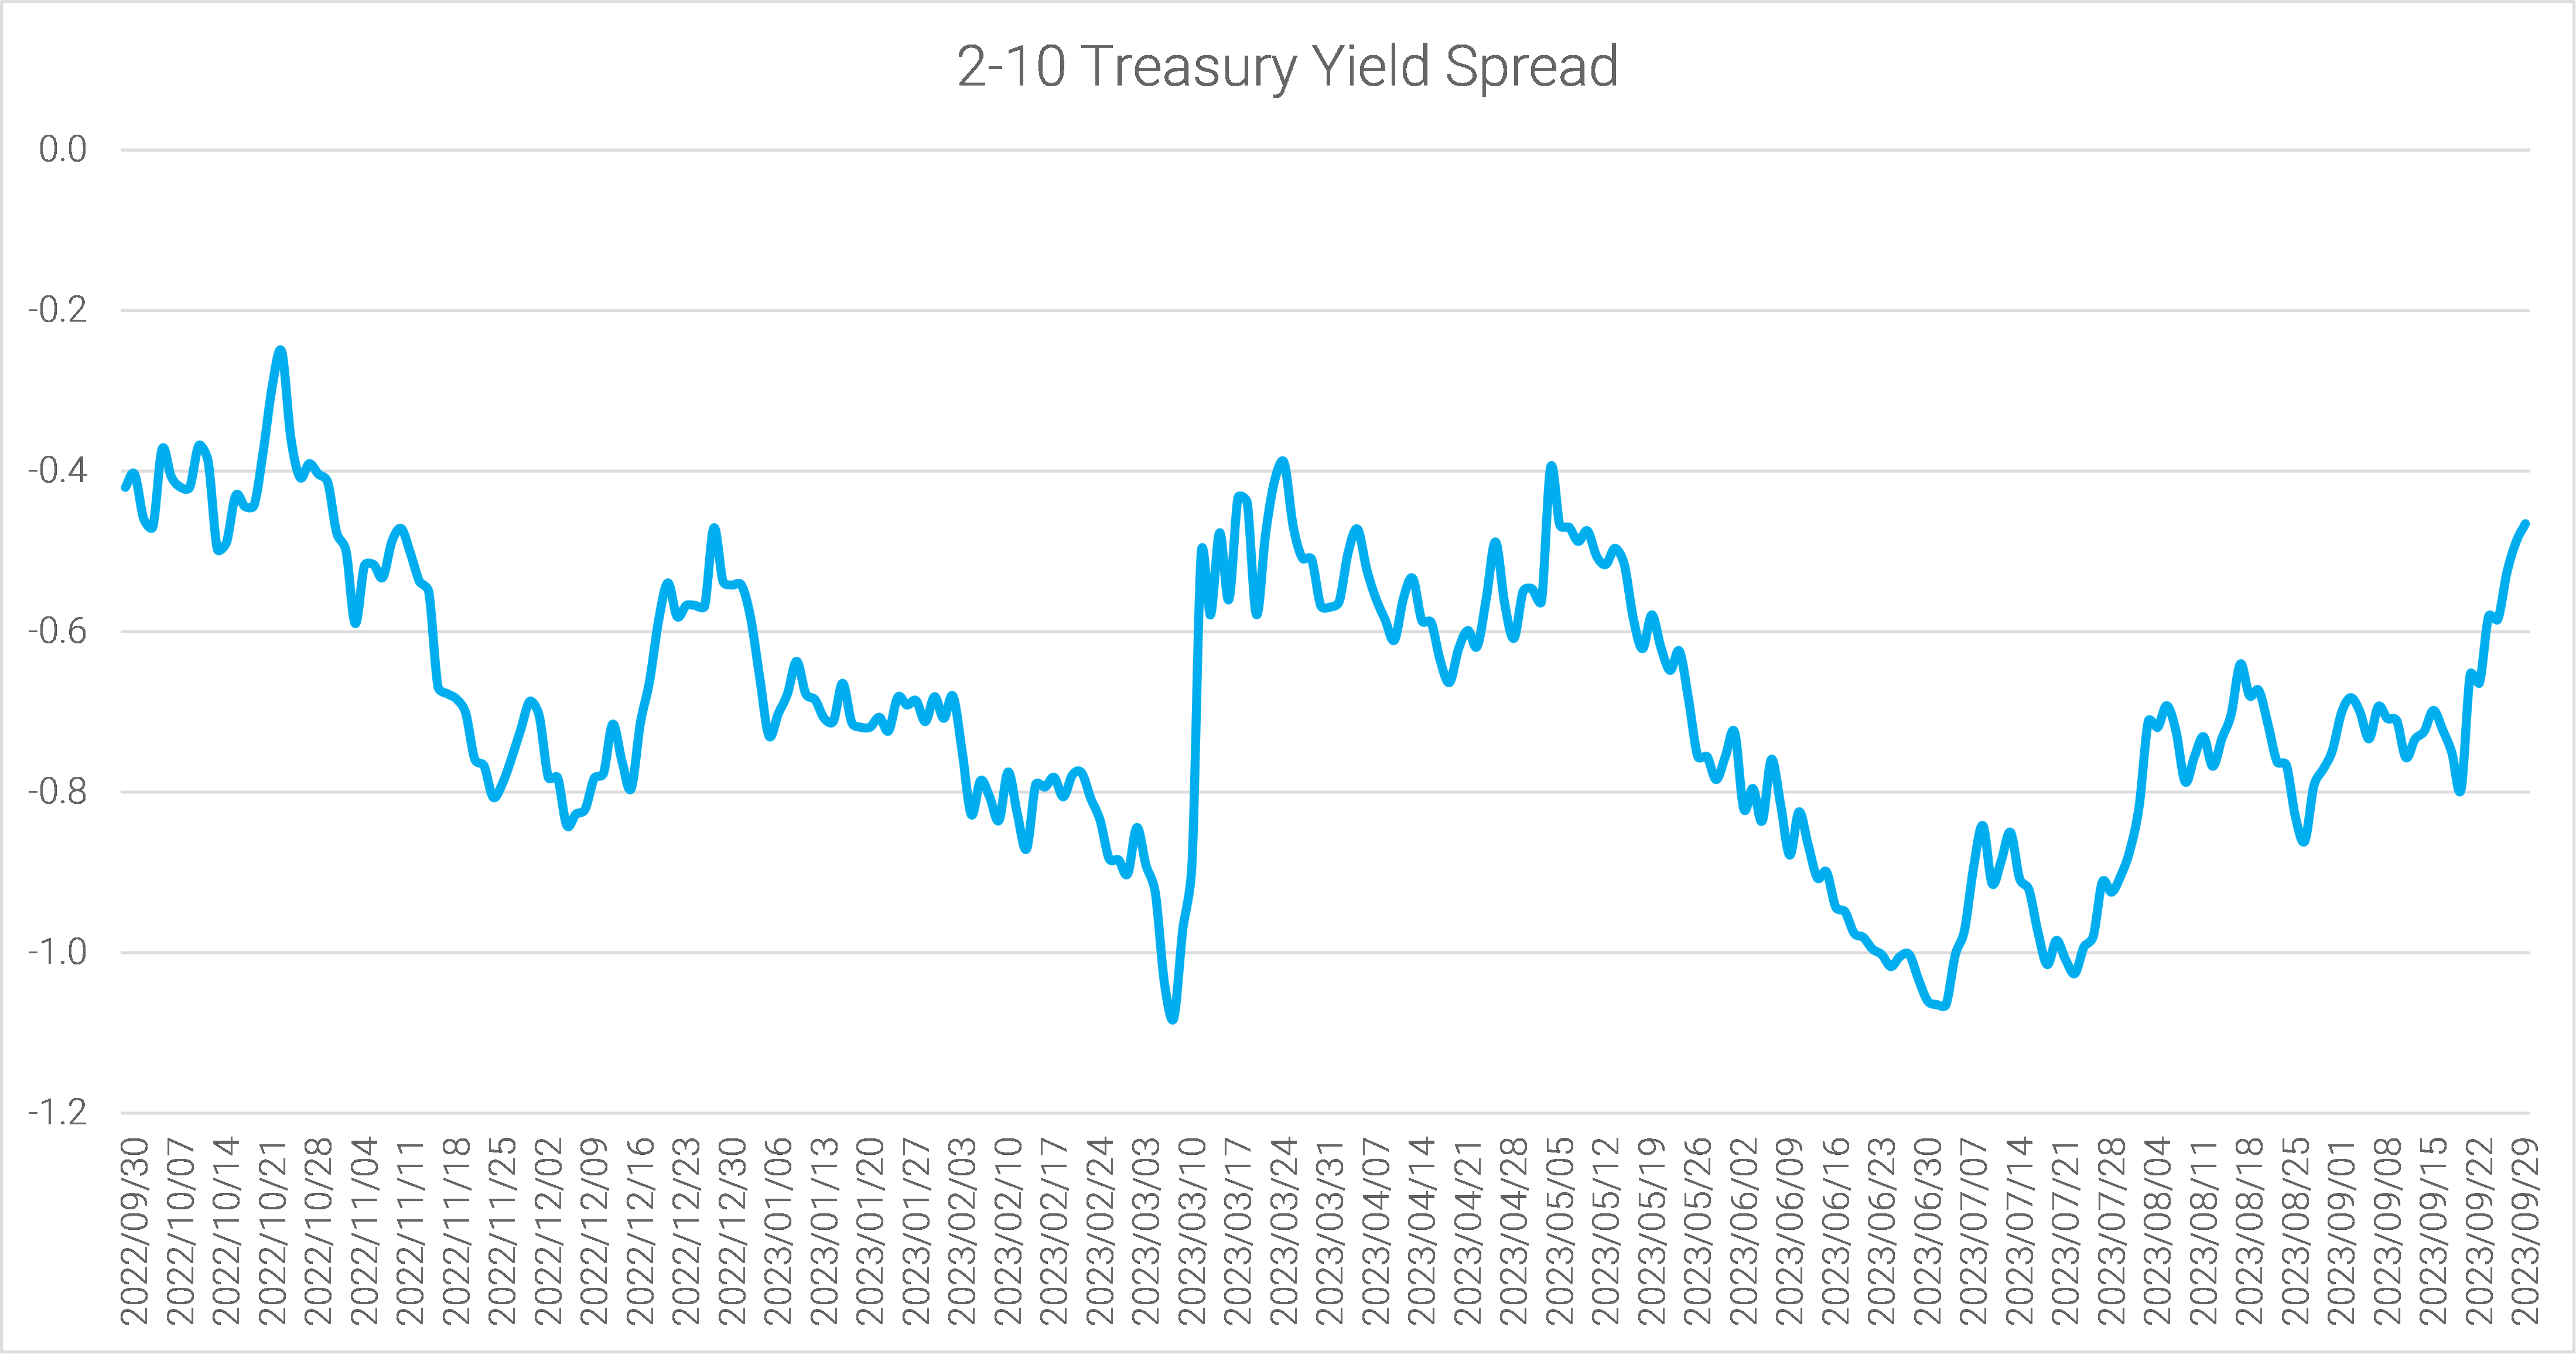 07-the-2-10-spread-narrowed-by-19bps-last-week-to-minus-47bps